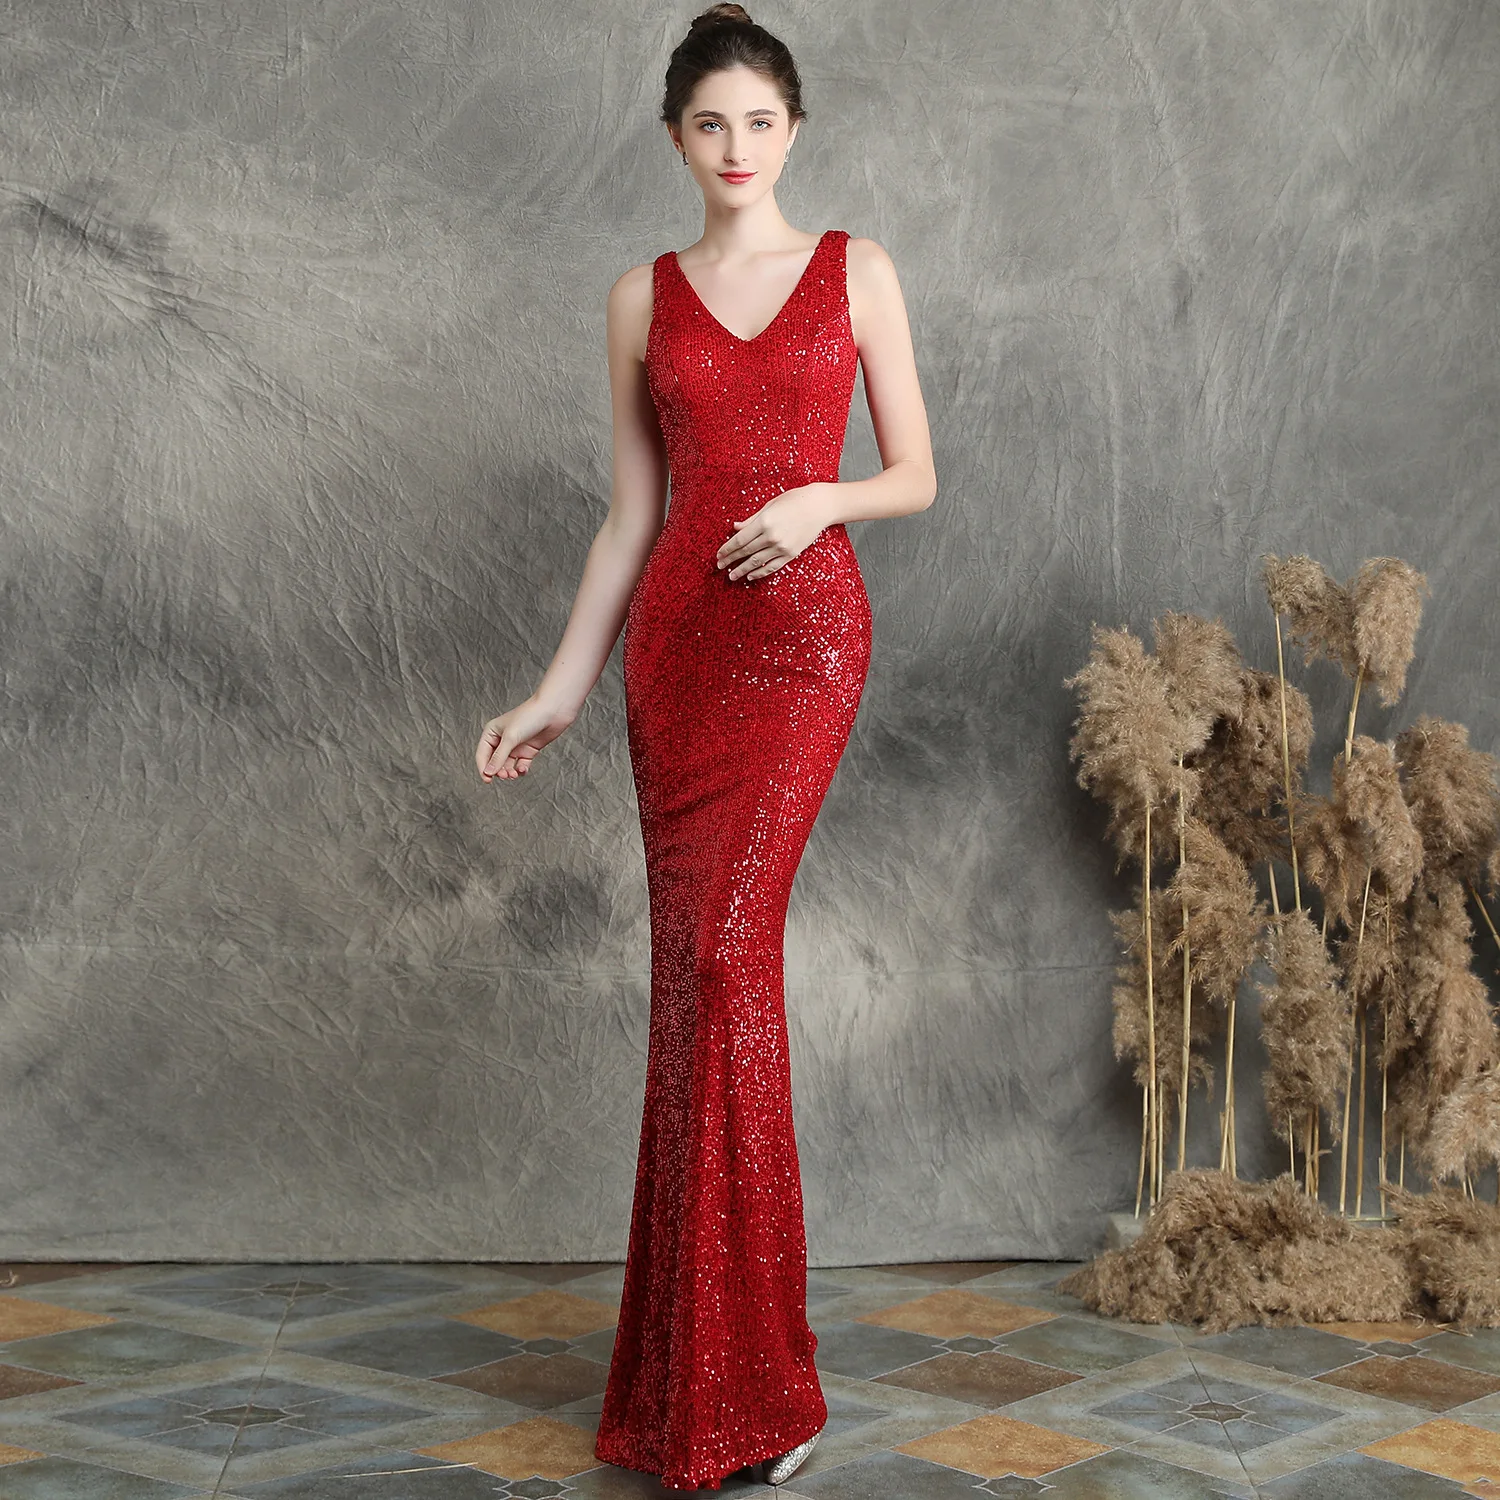 

2023 Hot dress,sequin evening dress long banquet slim fitting fishtail elegant celebrity party annual meeting host